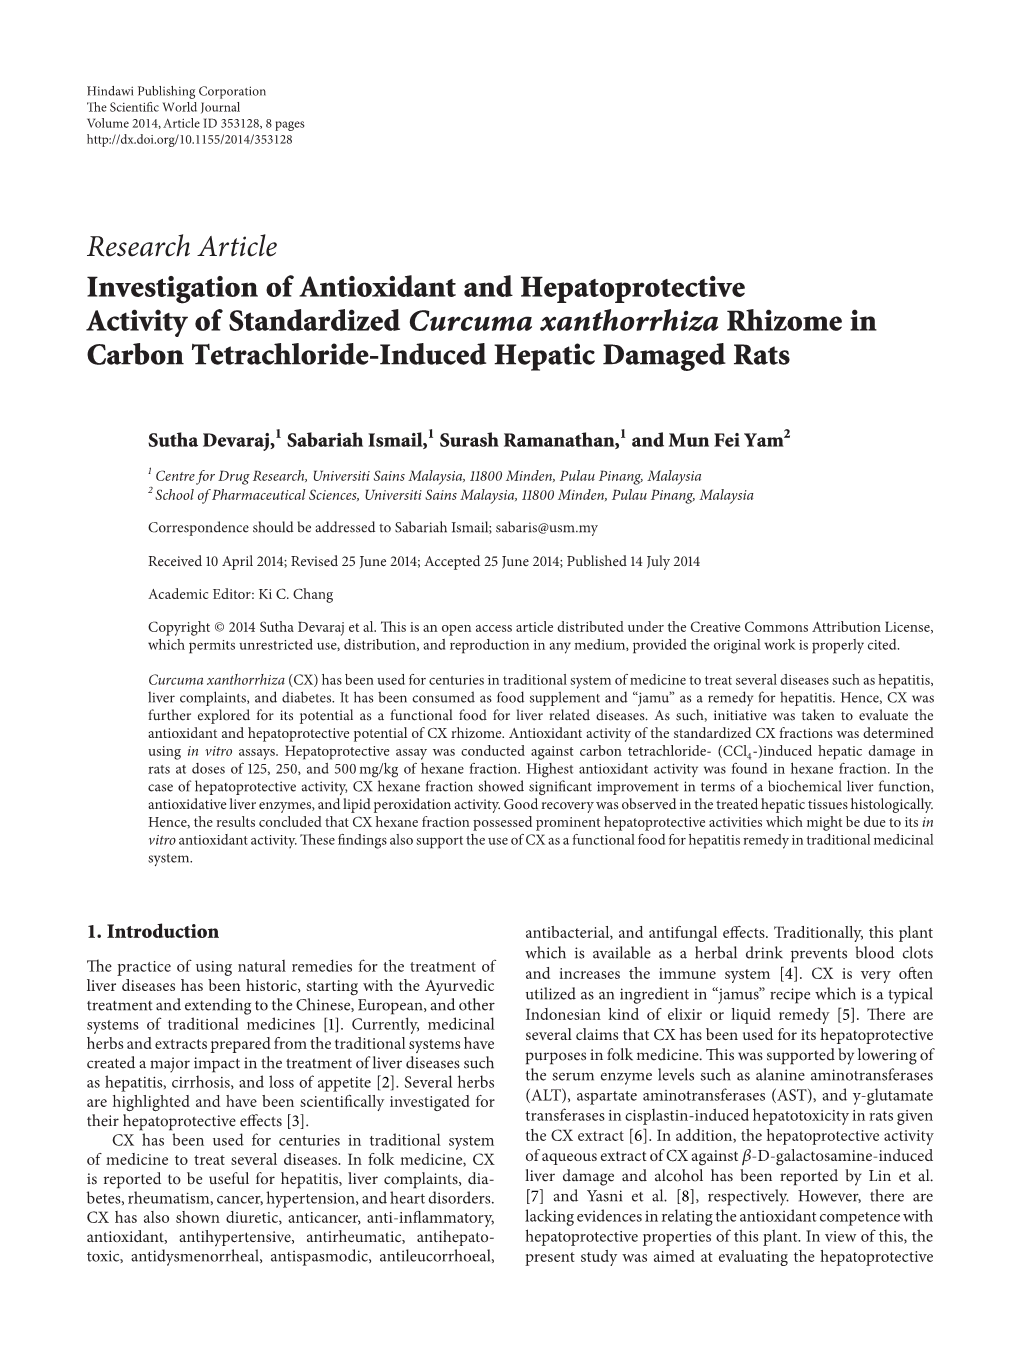 Investigation of Antioxidant and Hepatoprotective Activity of Standardized Curcuma Xanthorrhiza Rhizome in Carbon Tetrachloride-Induced Hepatic Damaged Rats